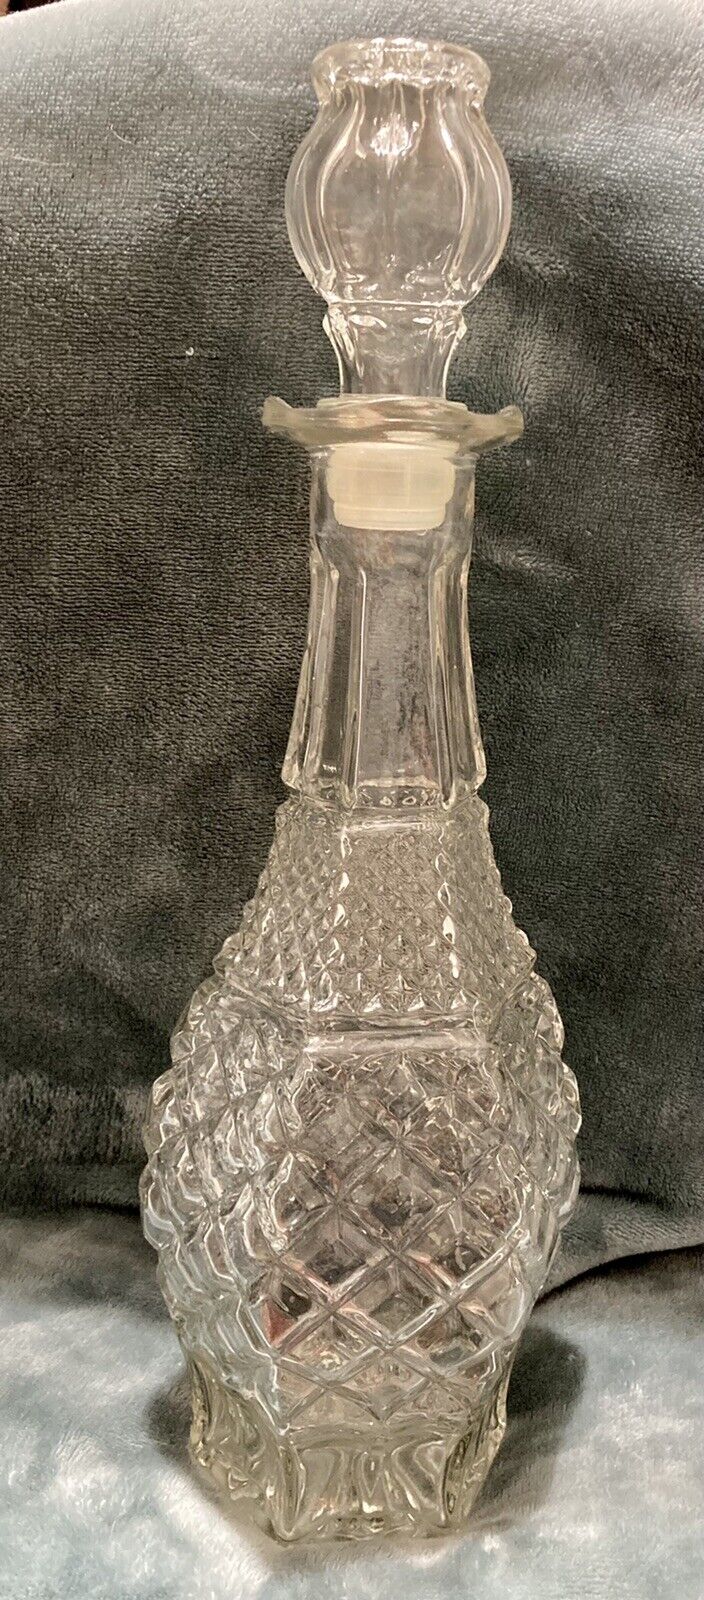 Vintage 1940’s-60’s Anchor Hocking Wexford Pattern Pressed Glass Decanter